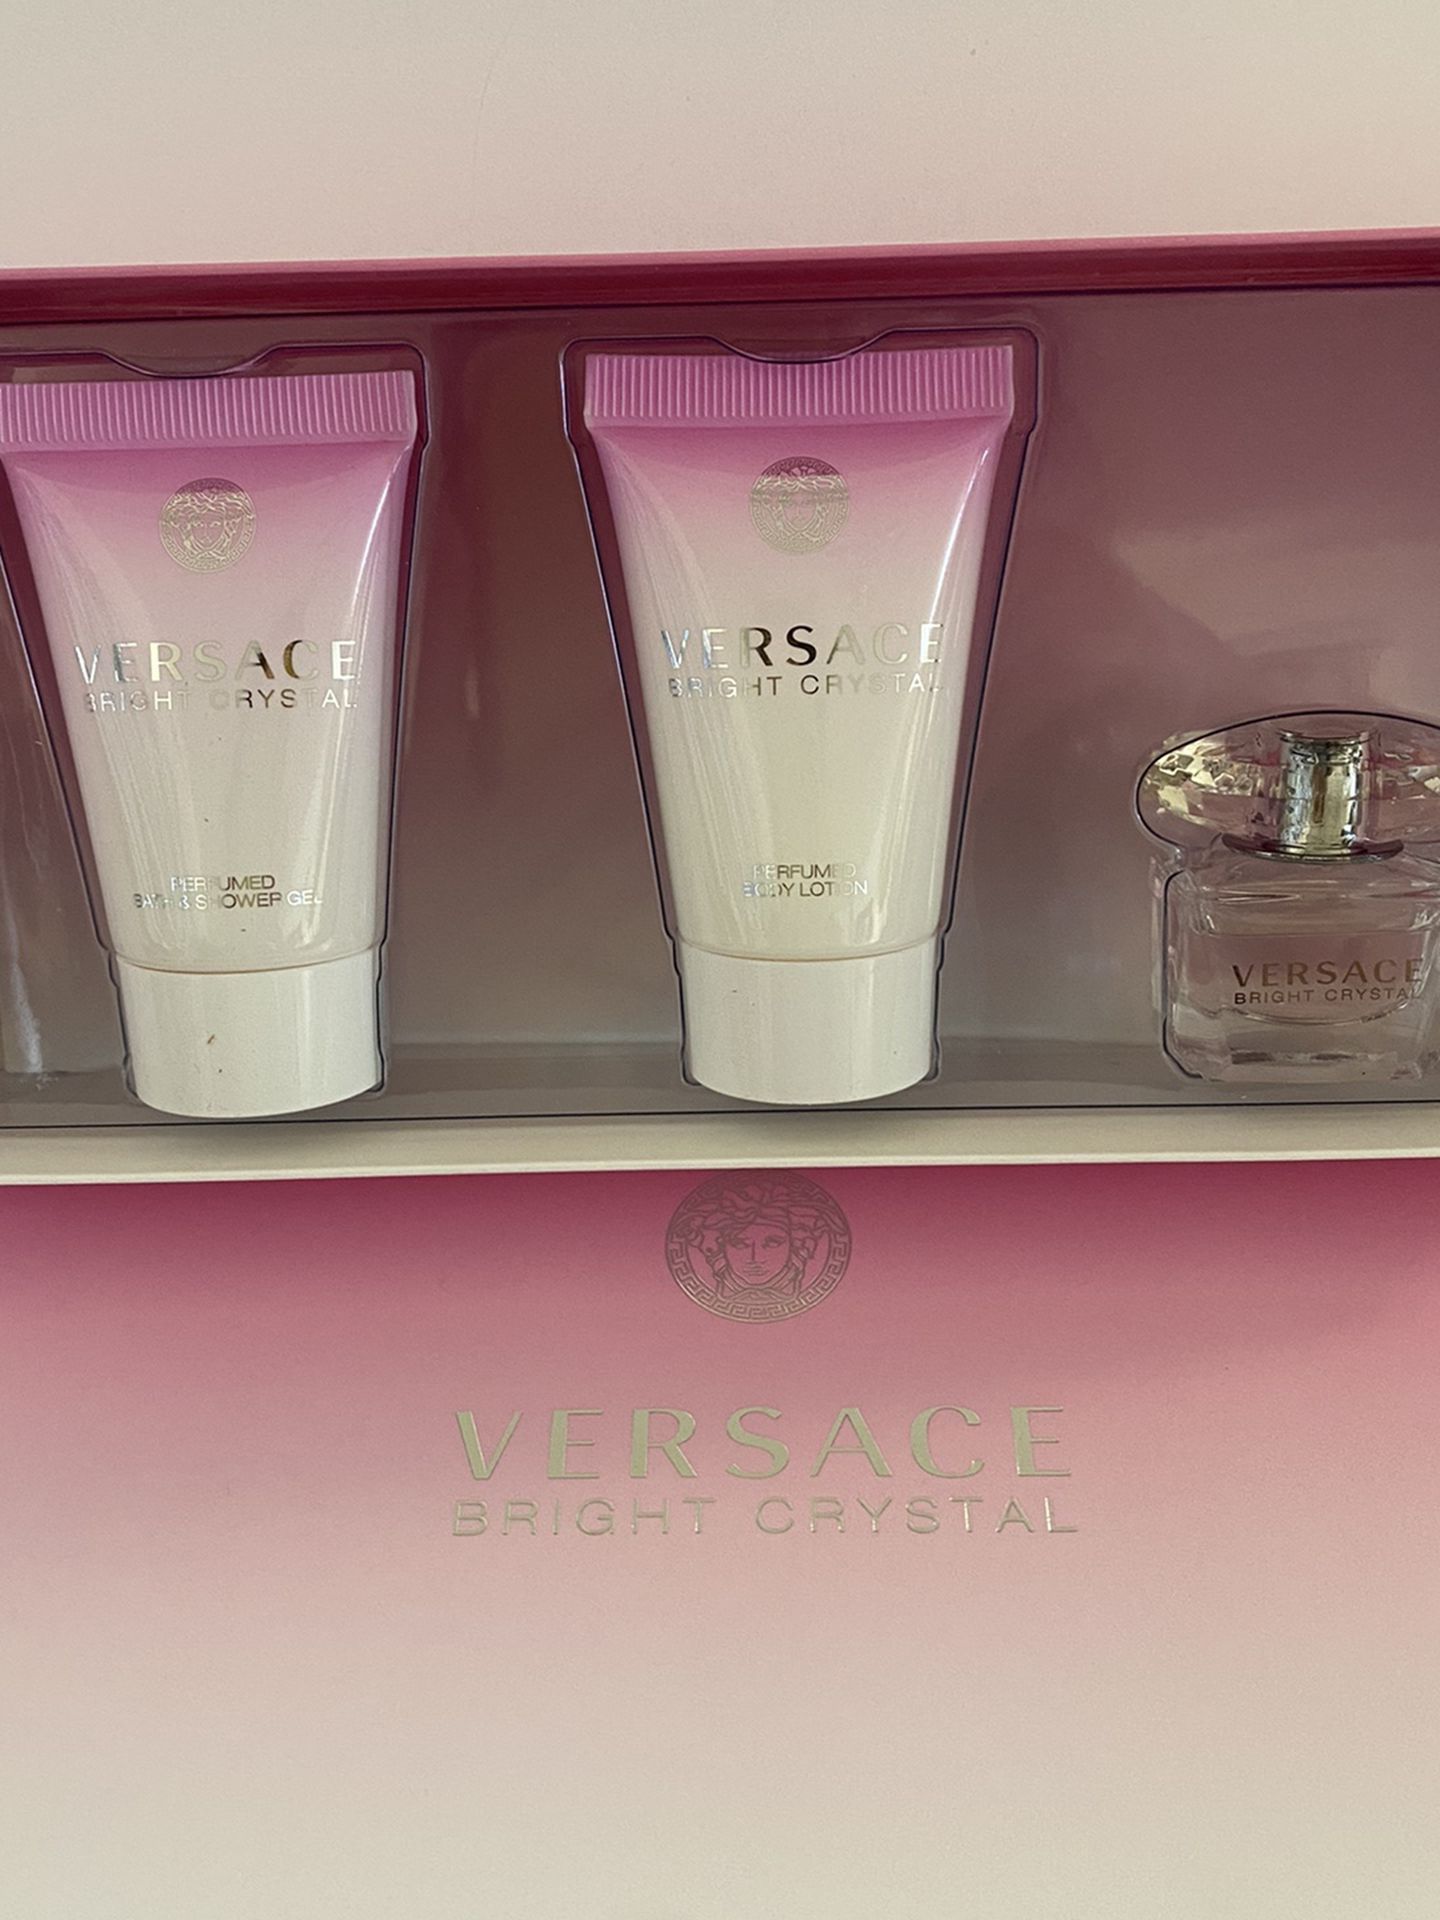 Versace Bright Crystal gift set includes: Versace Bright Crystal Eau de toilette 5ml Versace Bright Crystal bath & shower gel 25ml/0.8oz Versace Brig